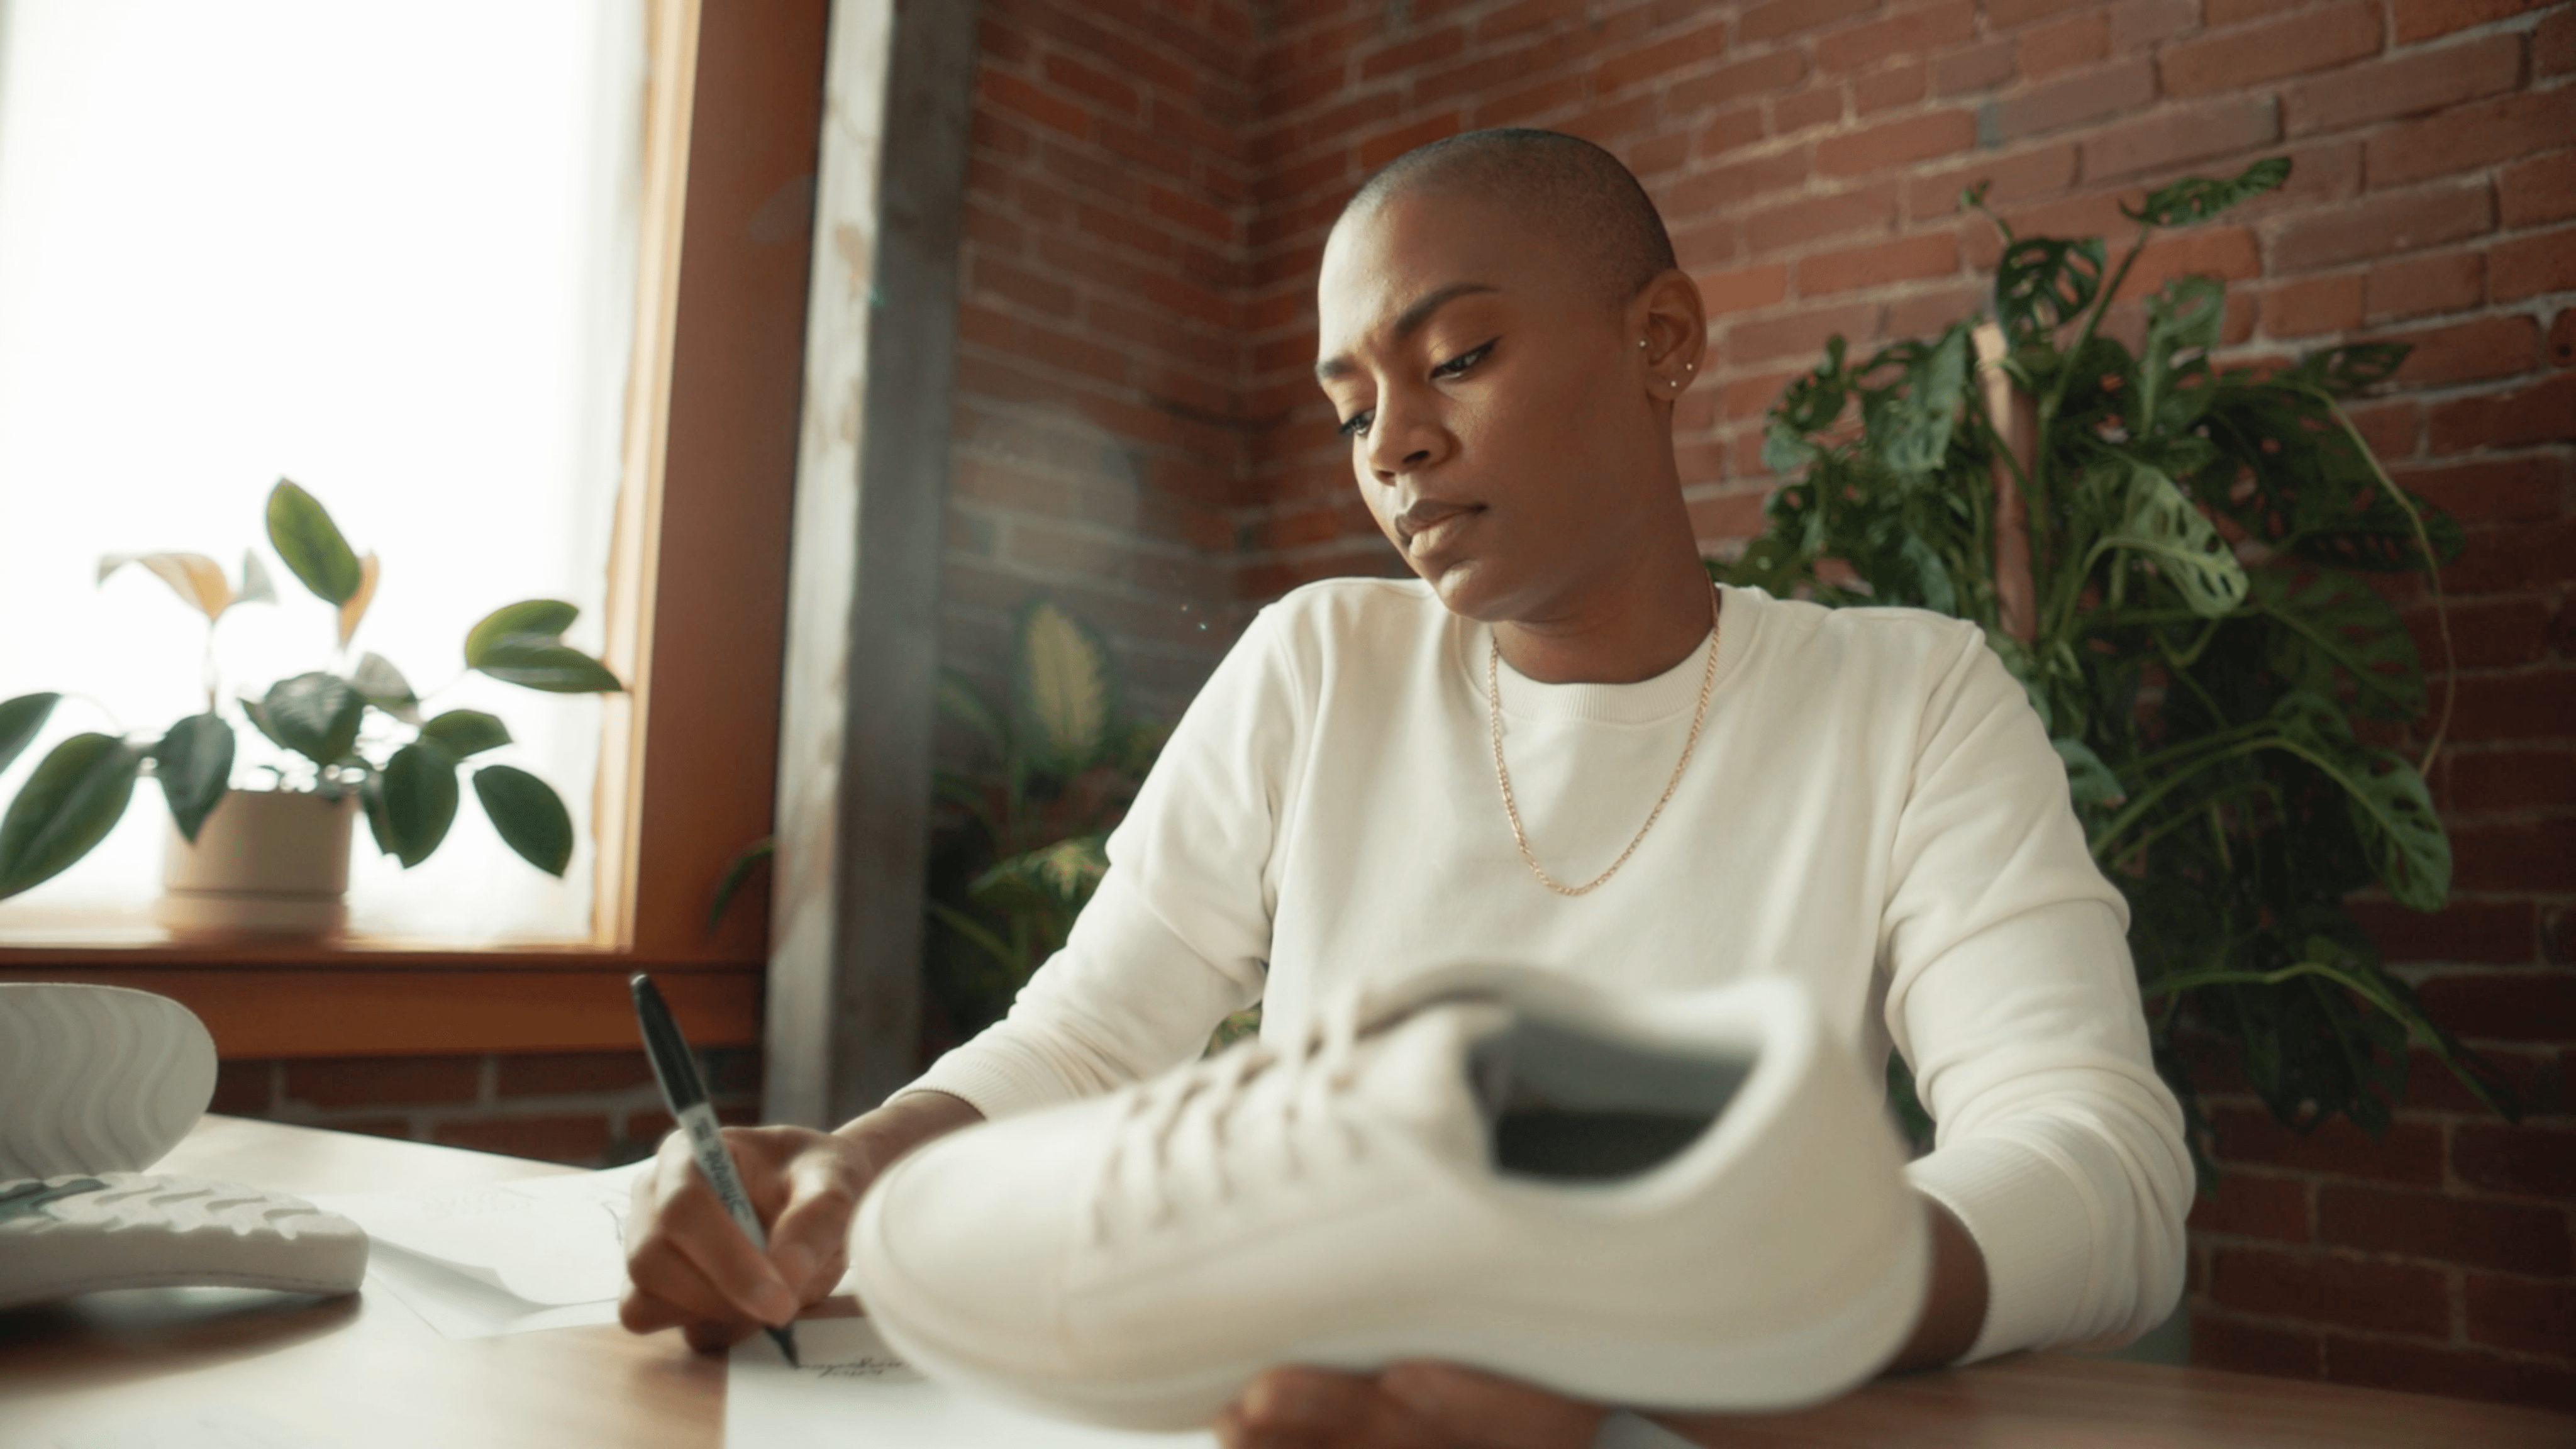 Allbirds - Behind the design with Ashley Comeaux